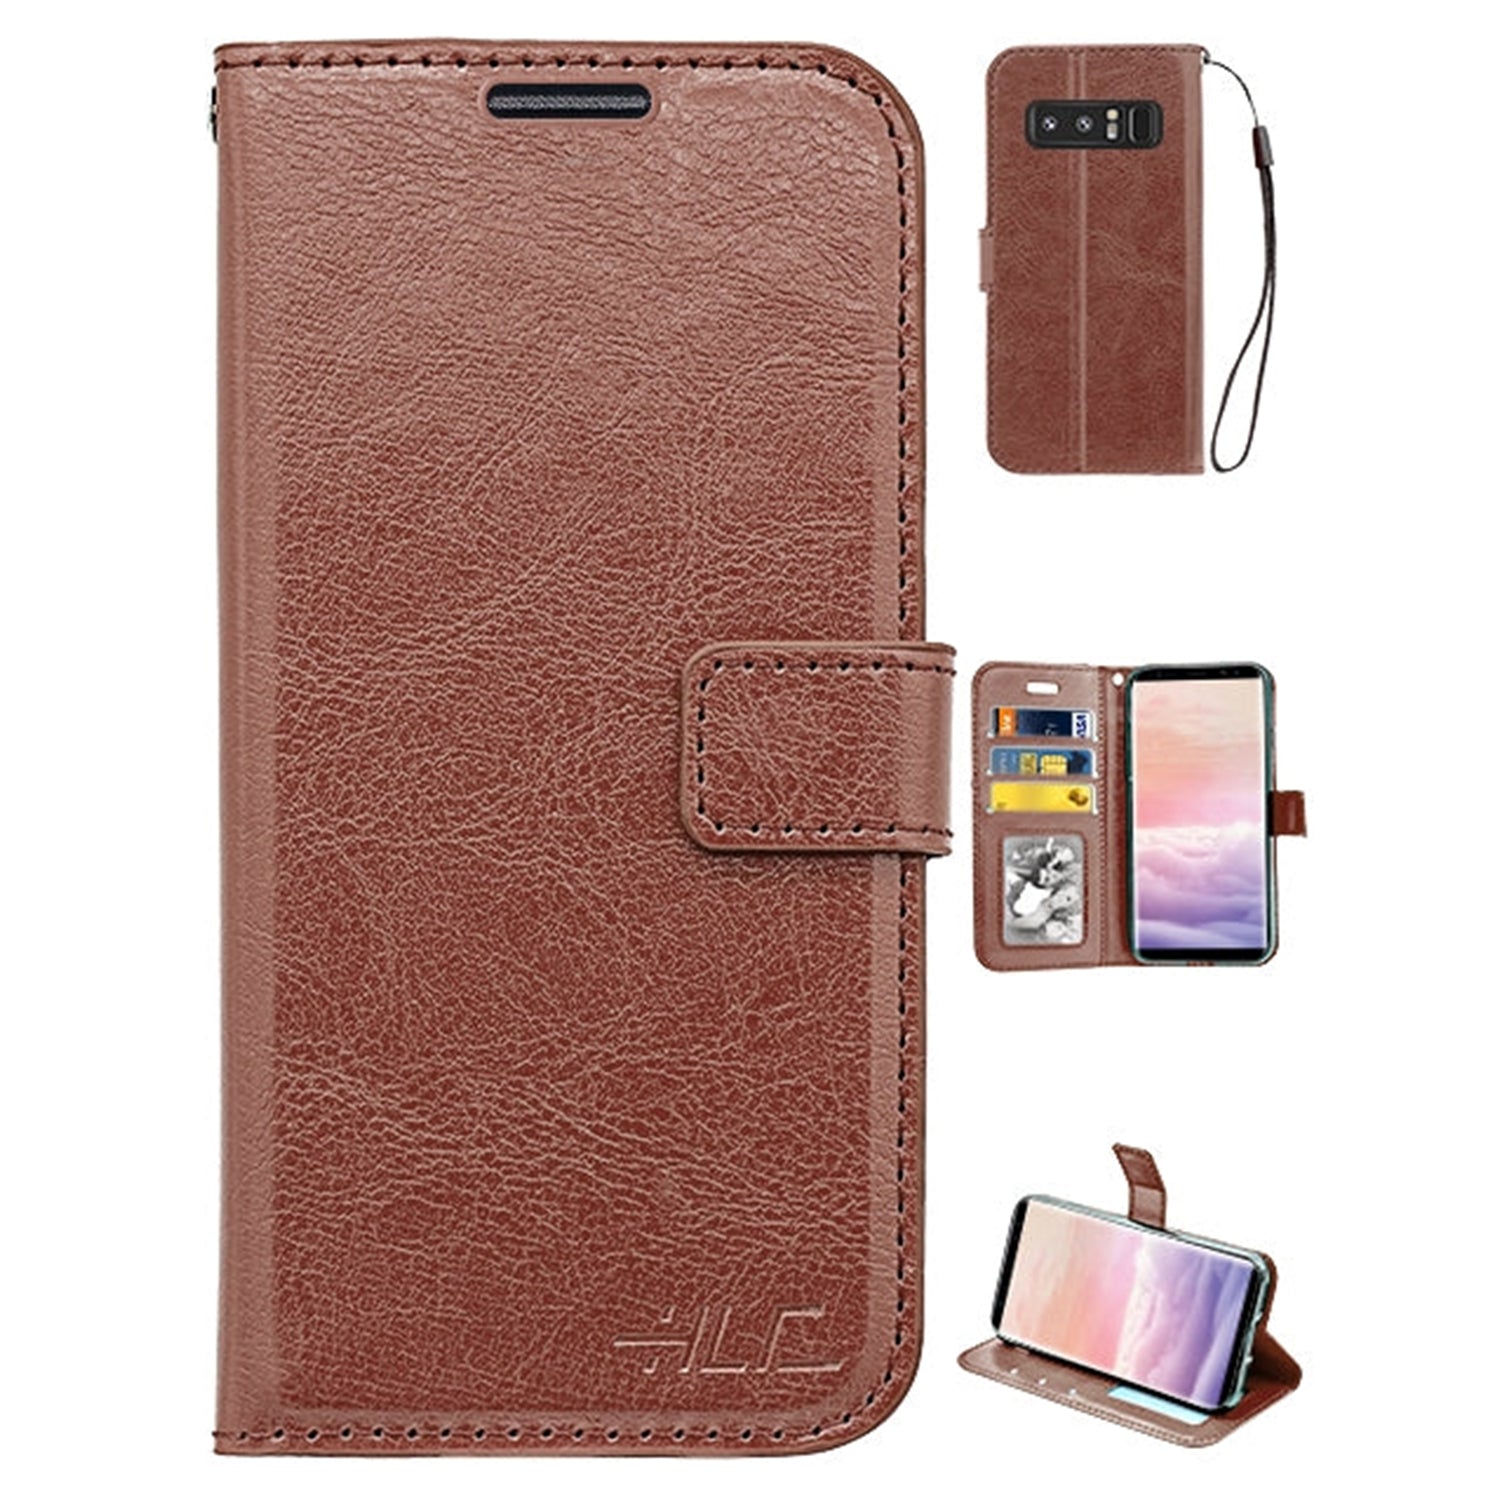 Note 8 Real Plain Leather Wallet Case